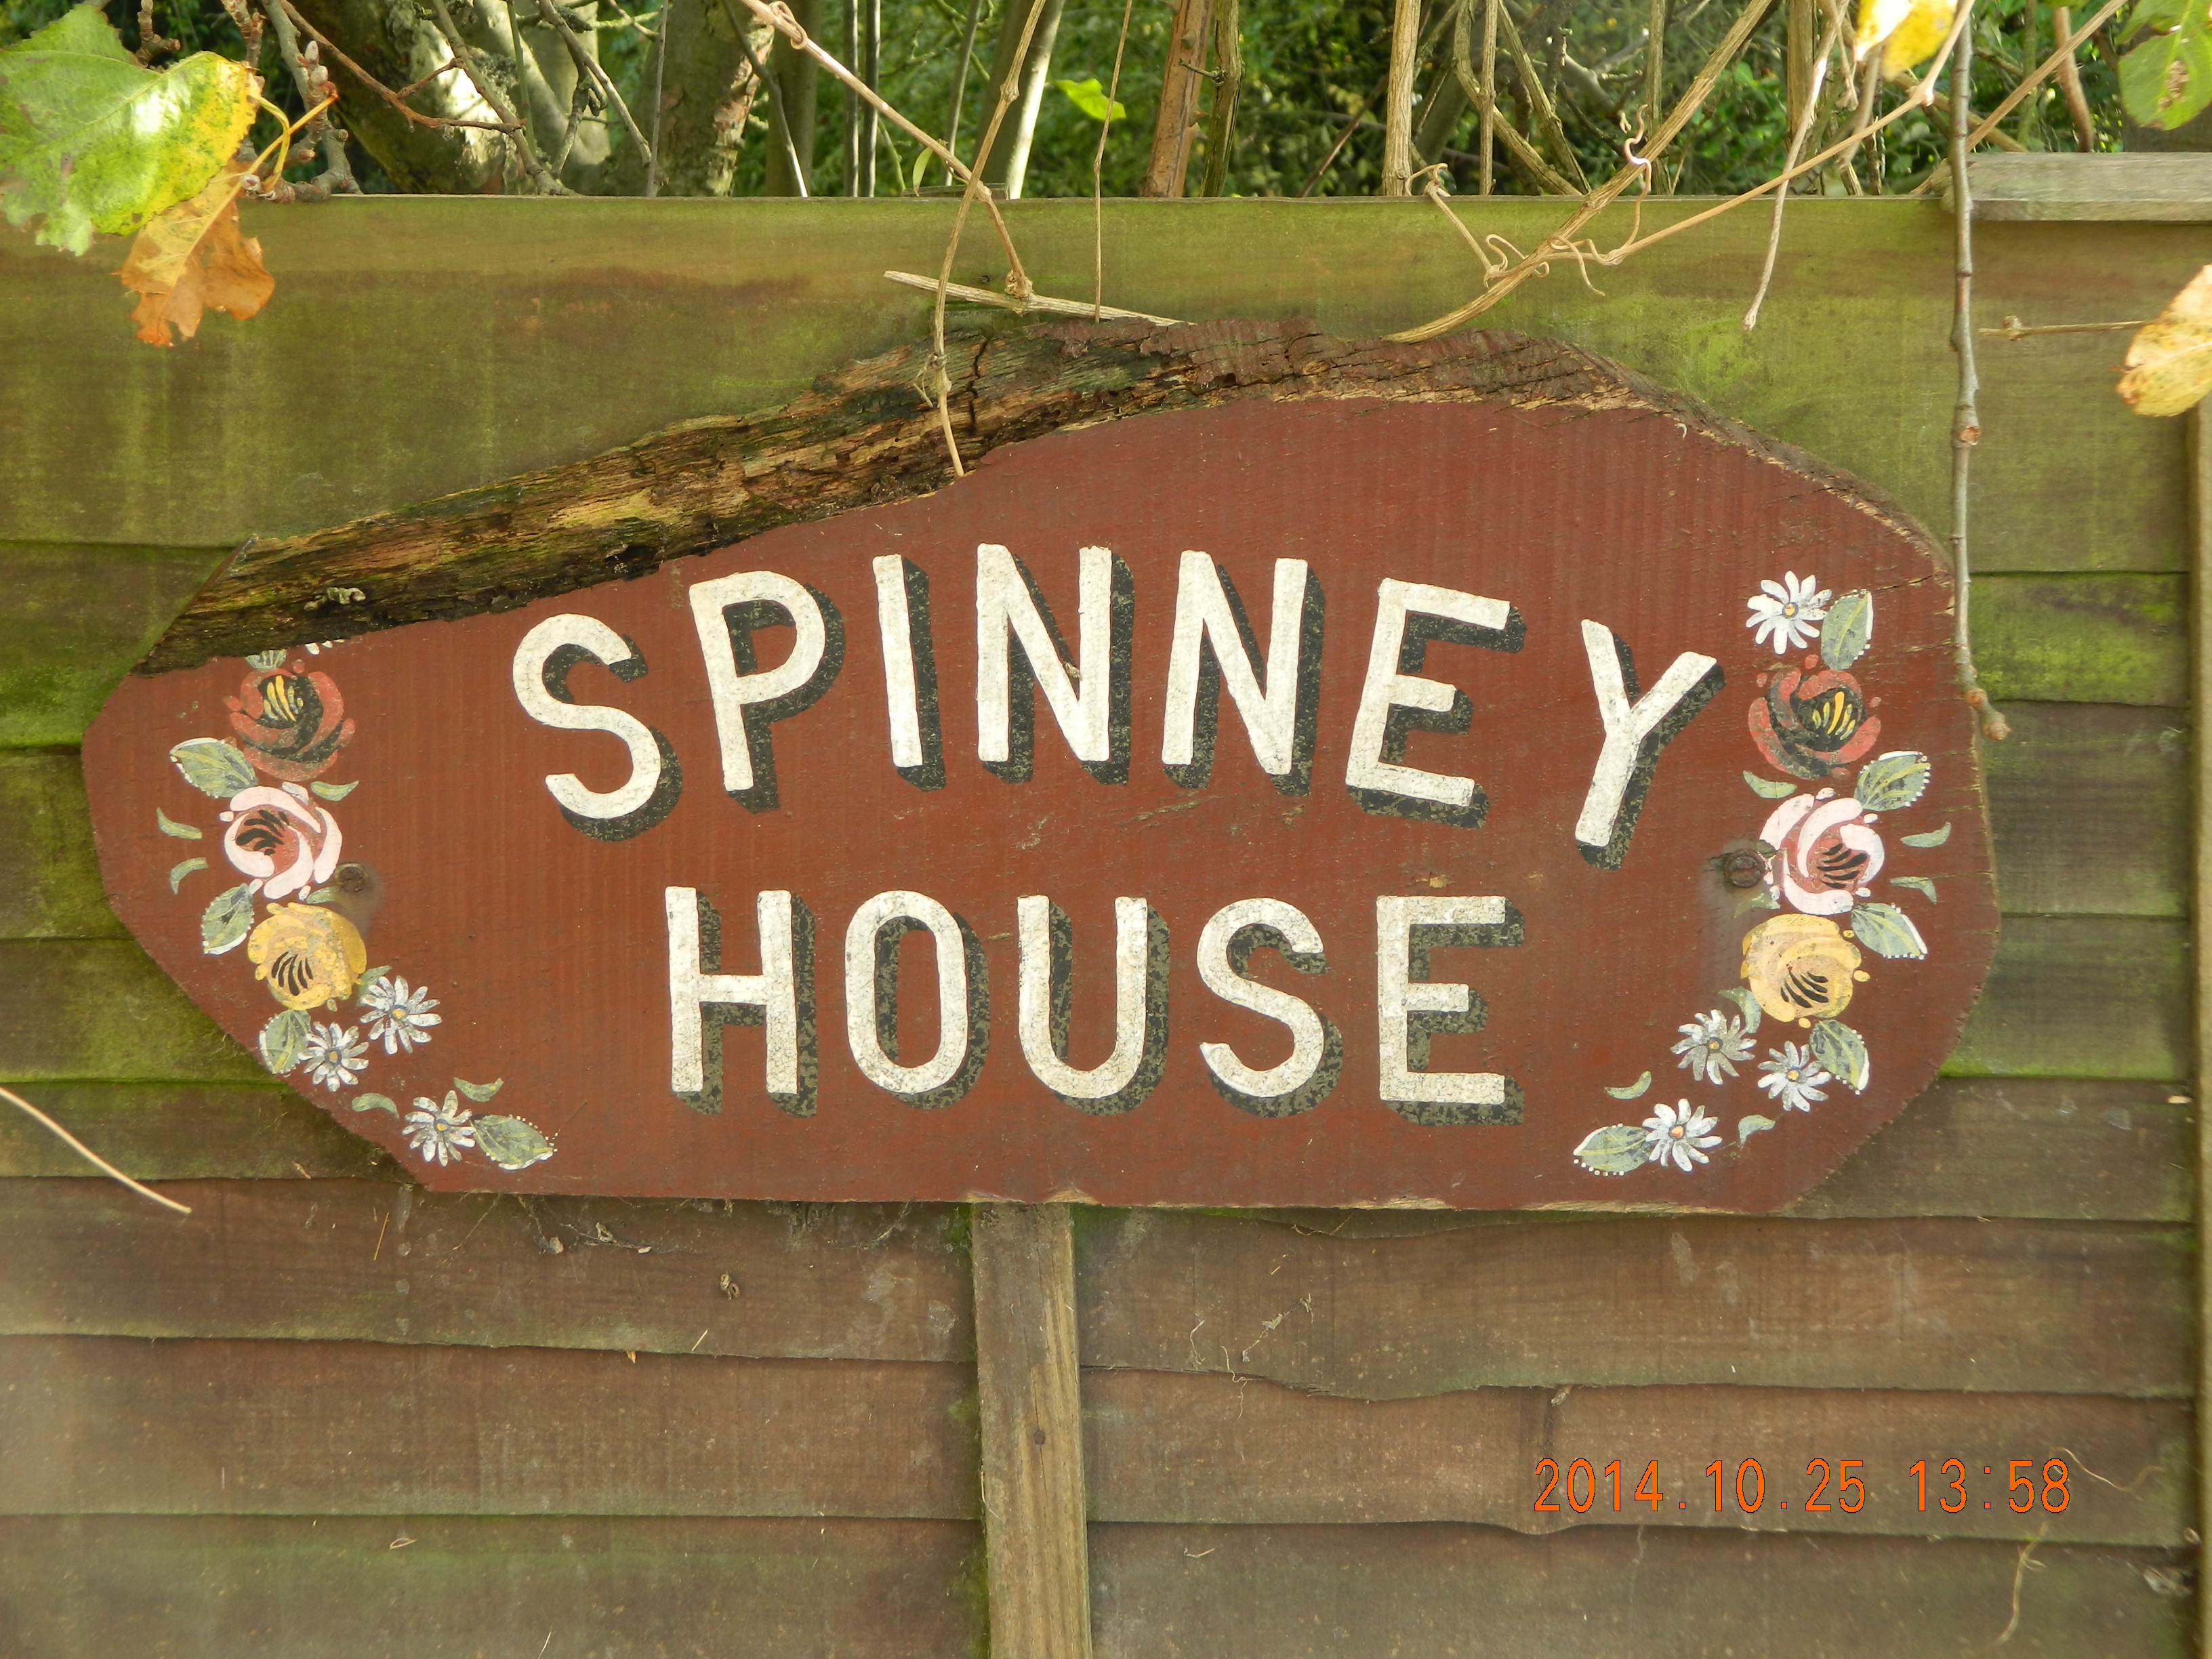 The Spinney House